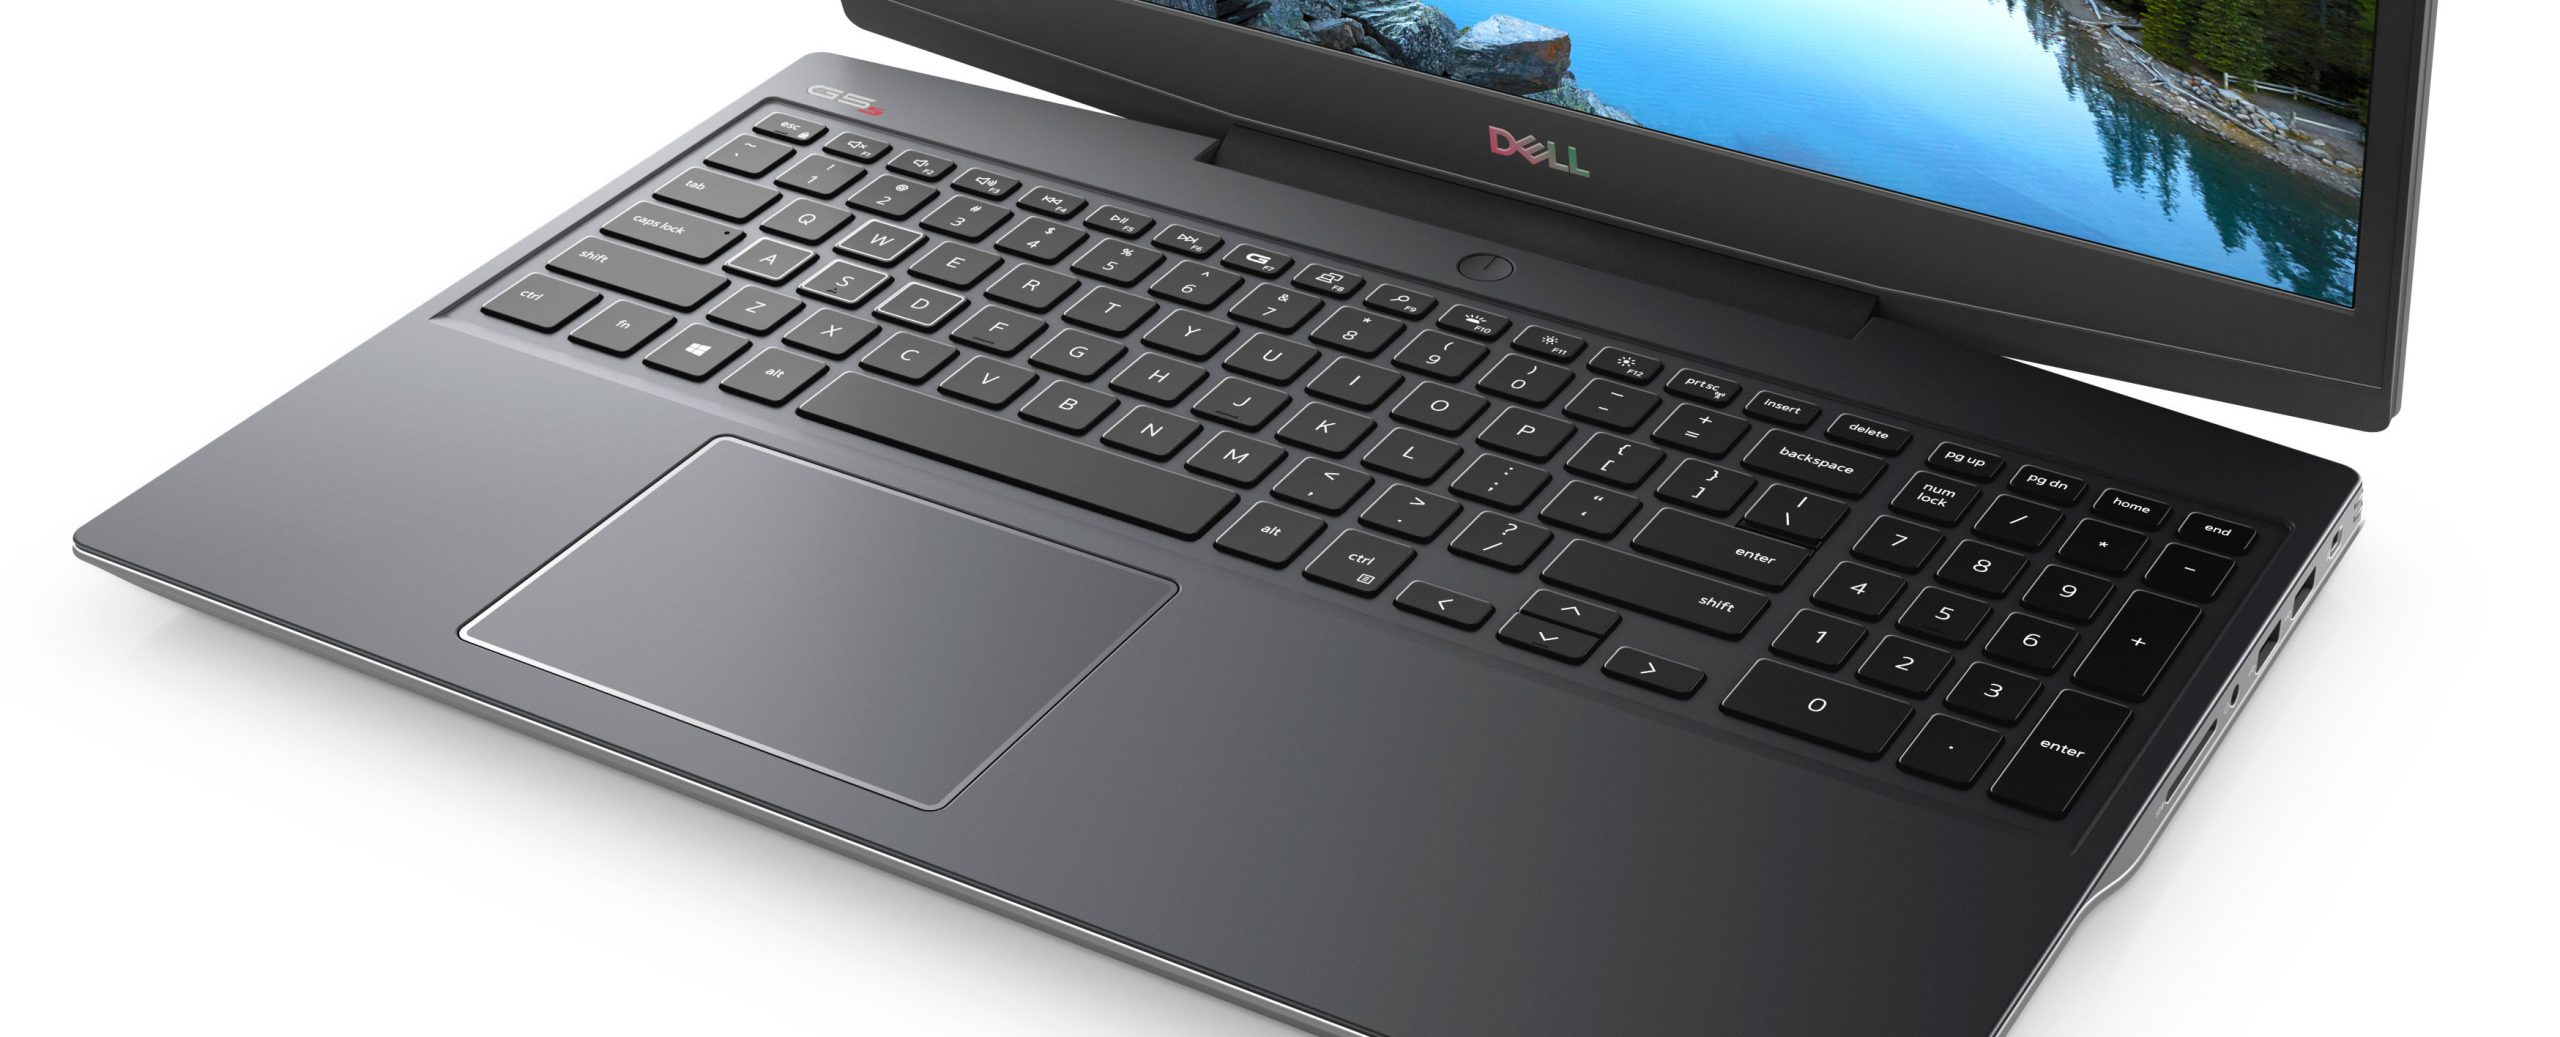 2020 Dell G5 15 SE with RGB keyboard and AMD hardware